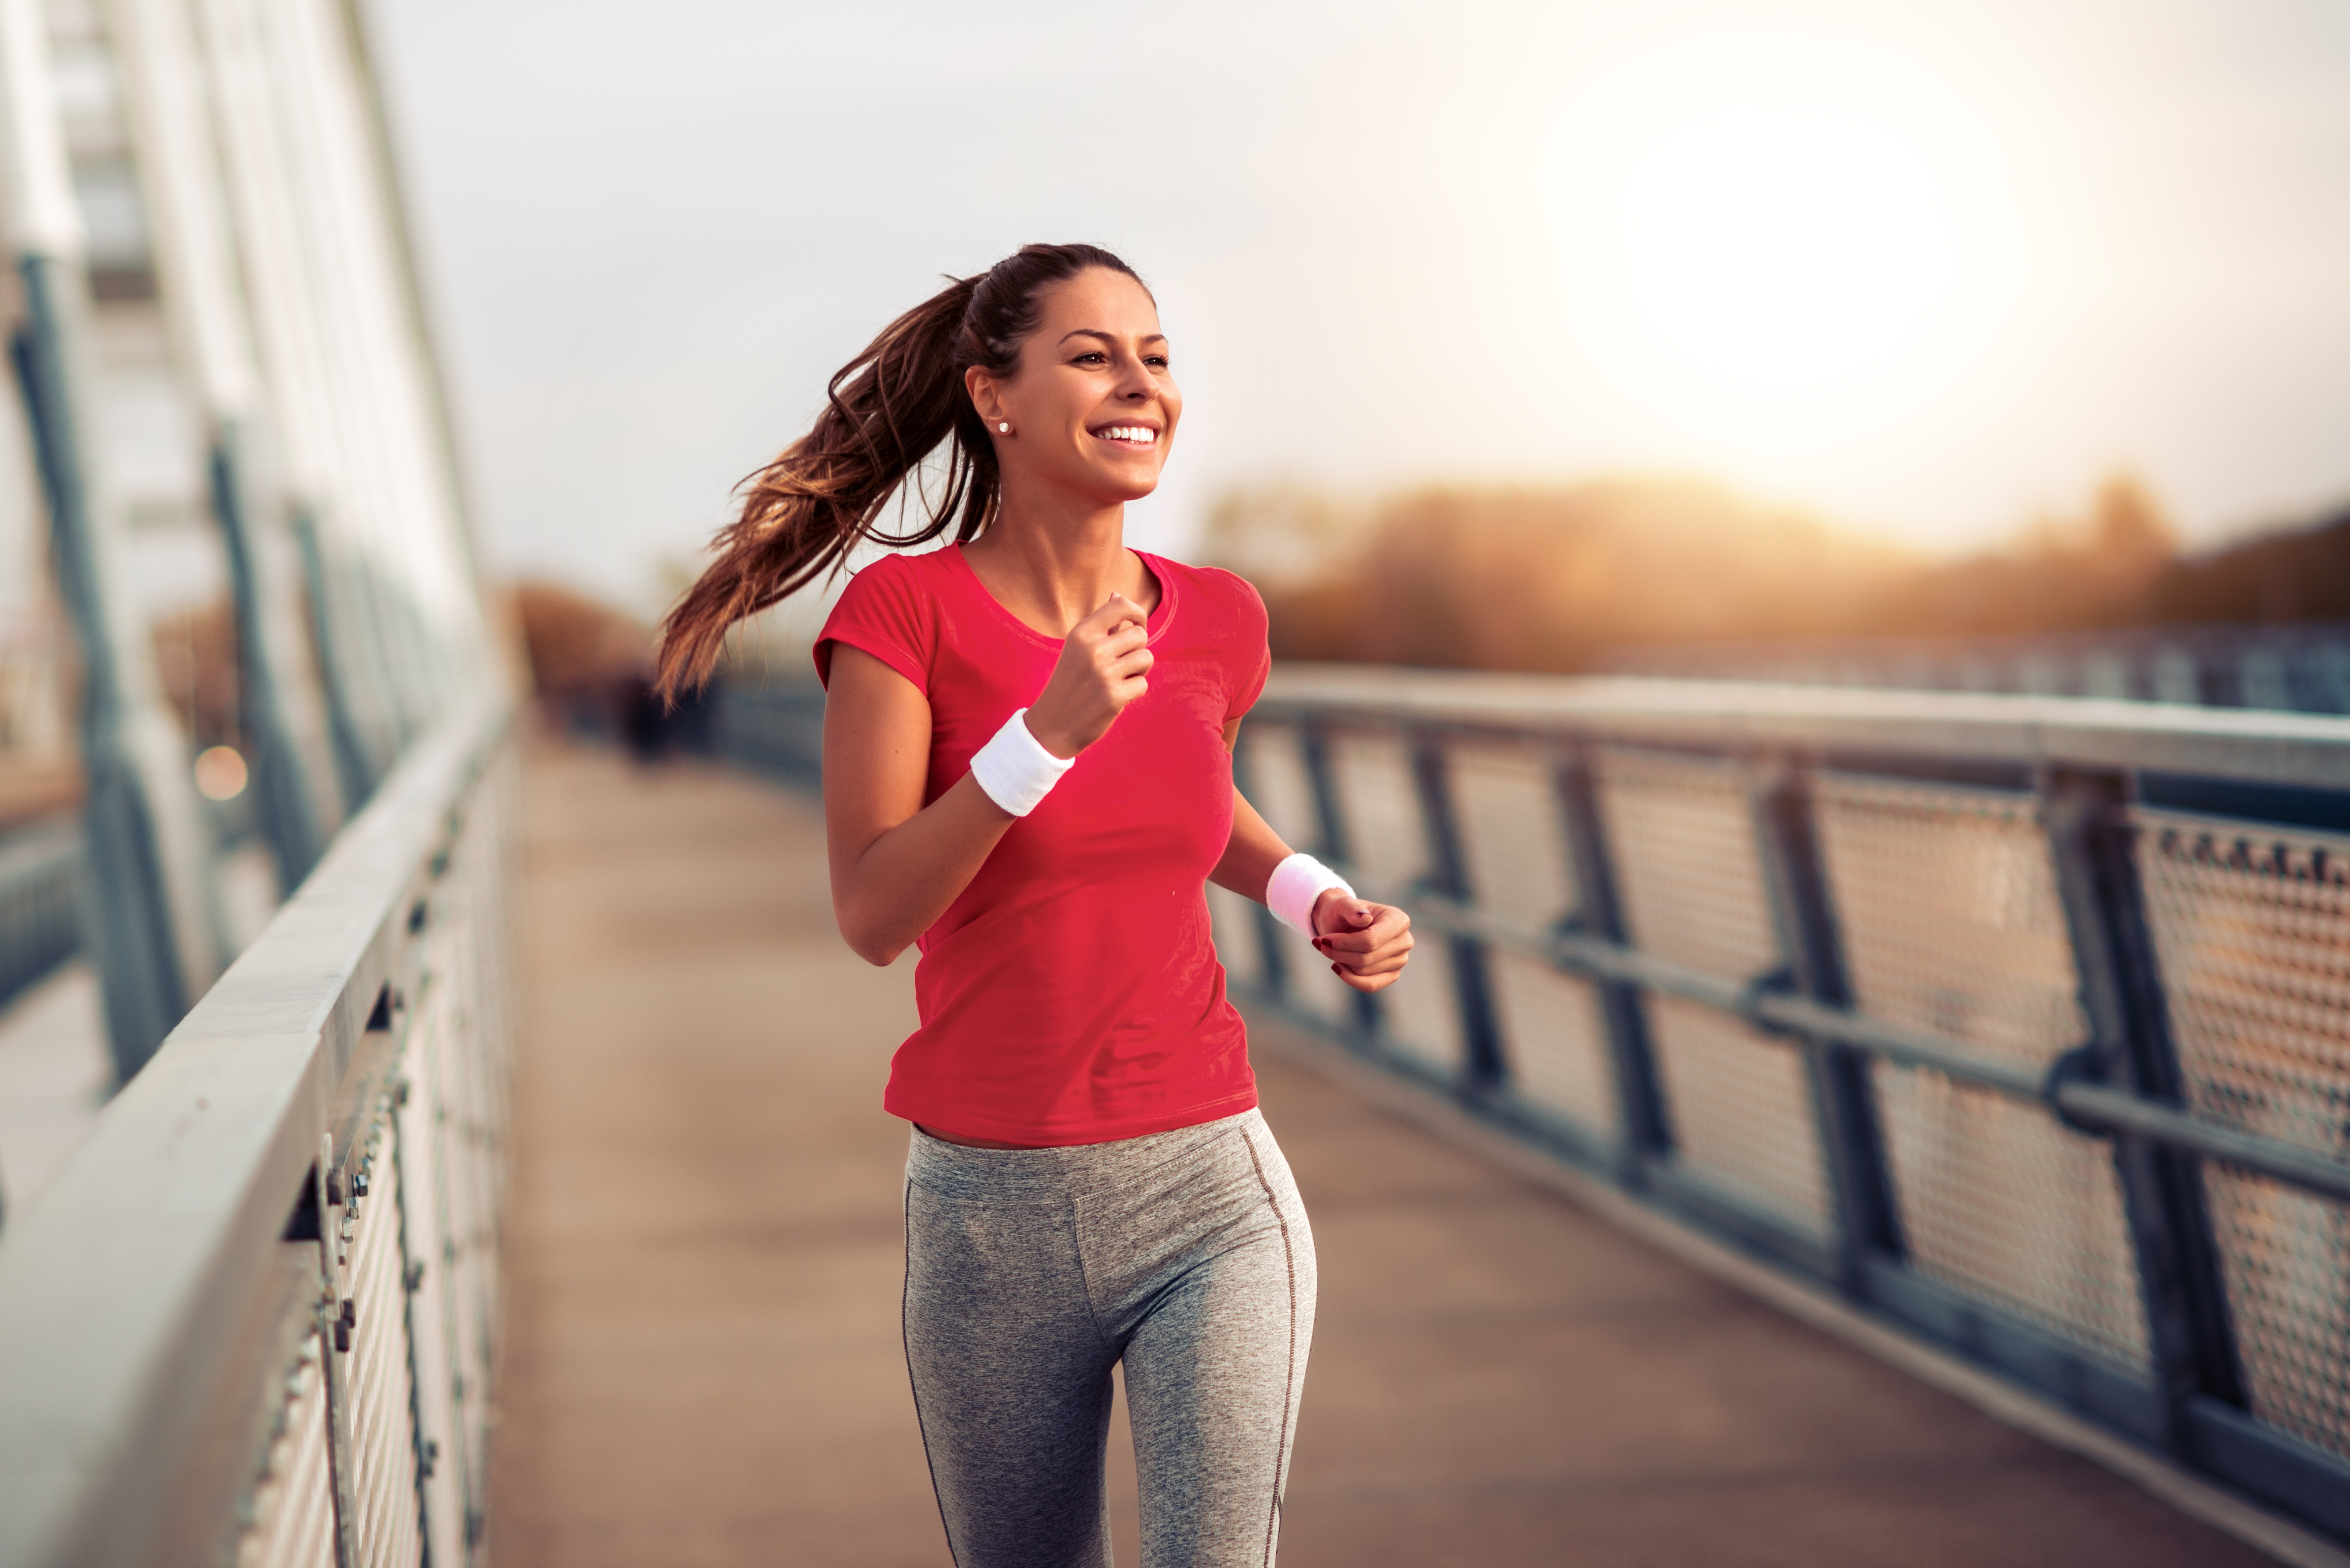 happy woman running excercising on her commute on a bridge by the water